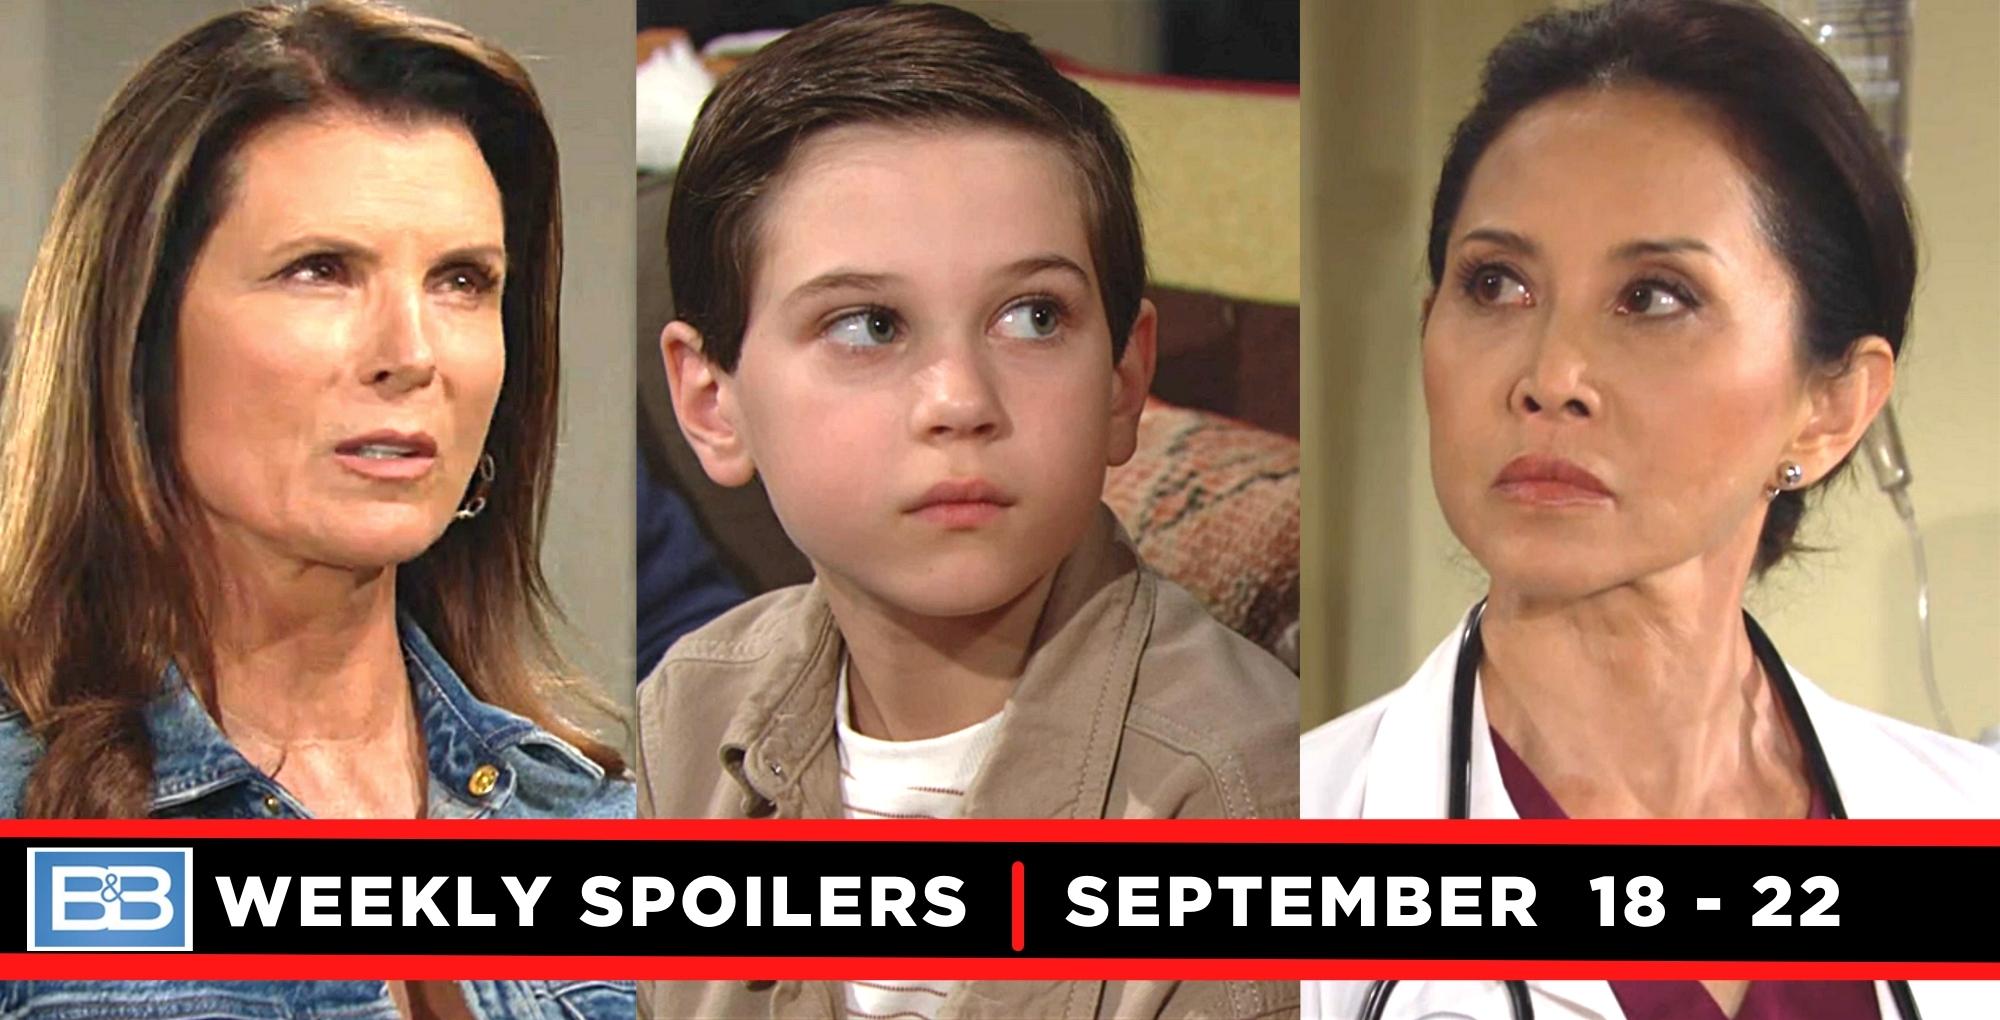 the bold and the beautiful spoilers for september 18 – september 22, 2023, three images, sheiila, douglas, and li.